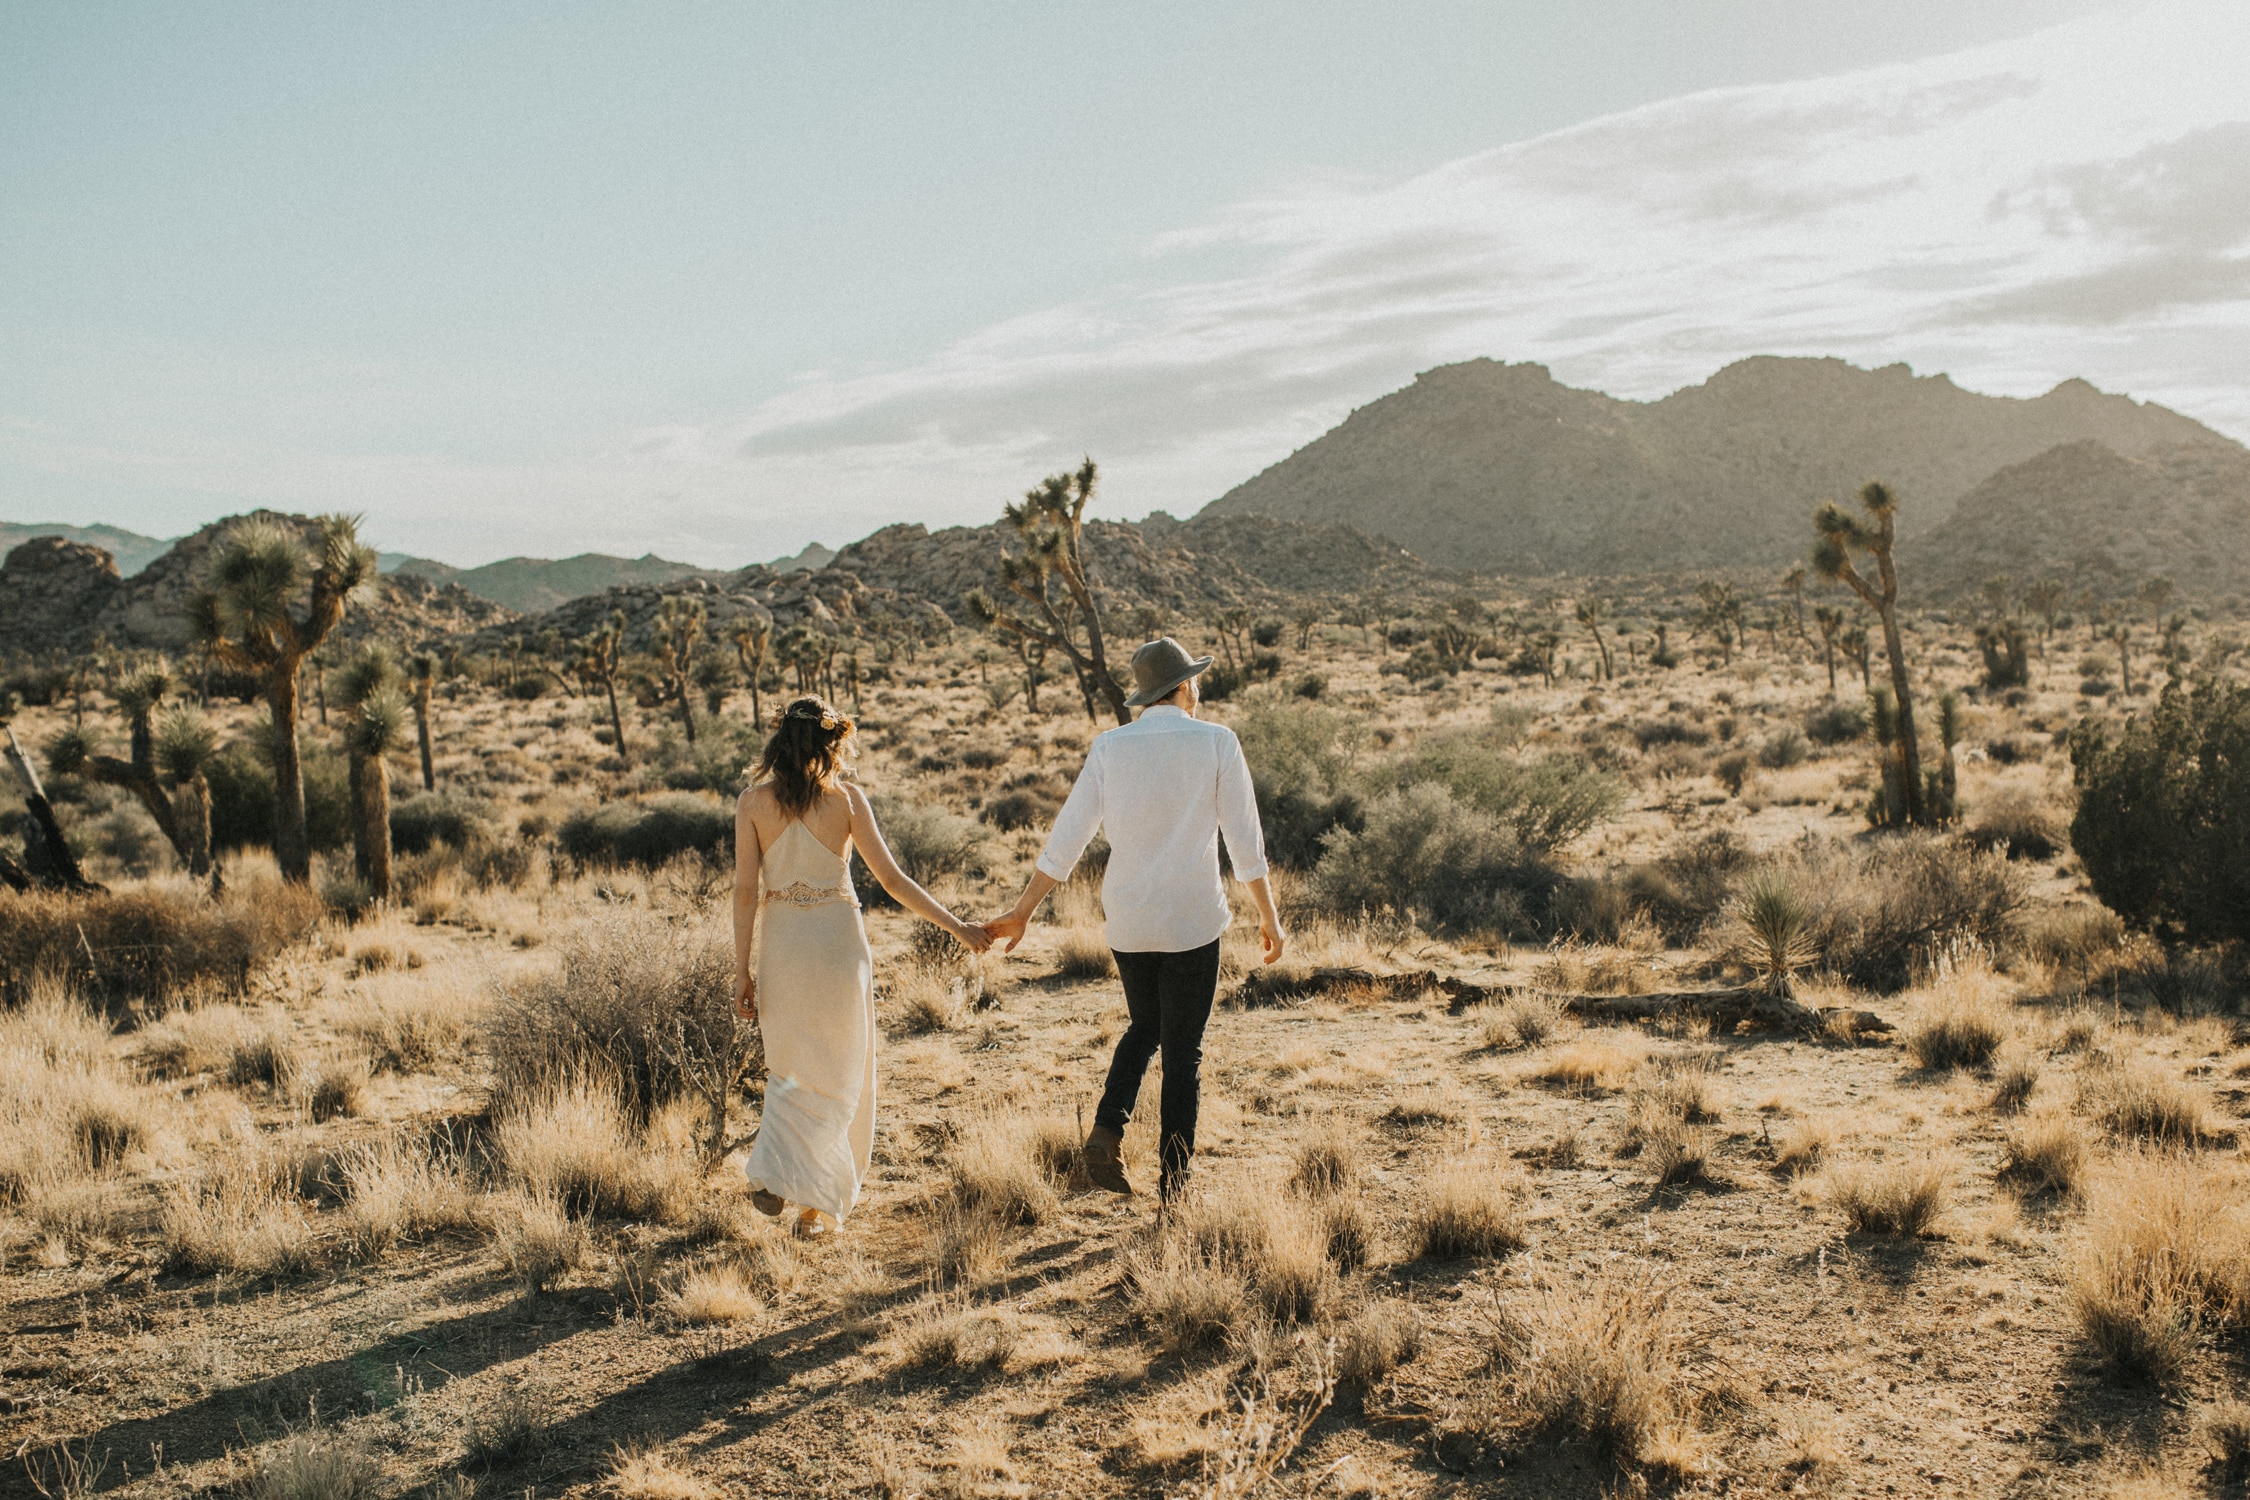 A couple is walking, holding hands, during their elopement in Joshua Tree National Park.